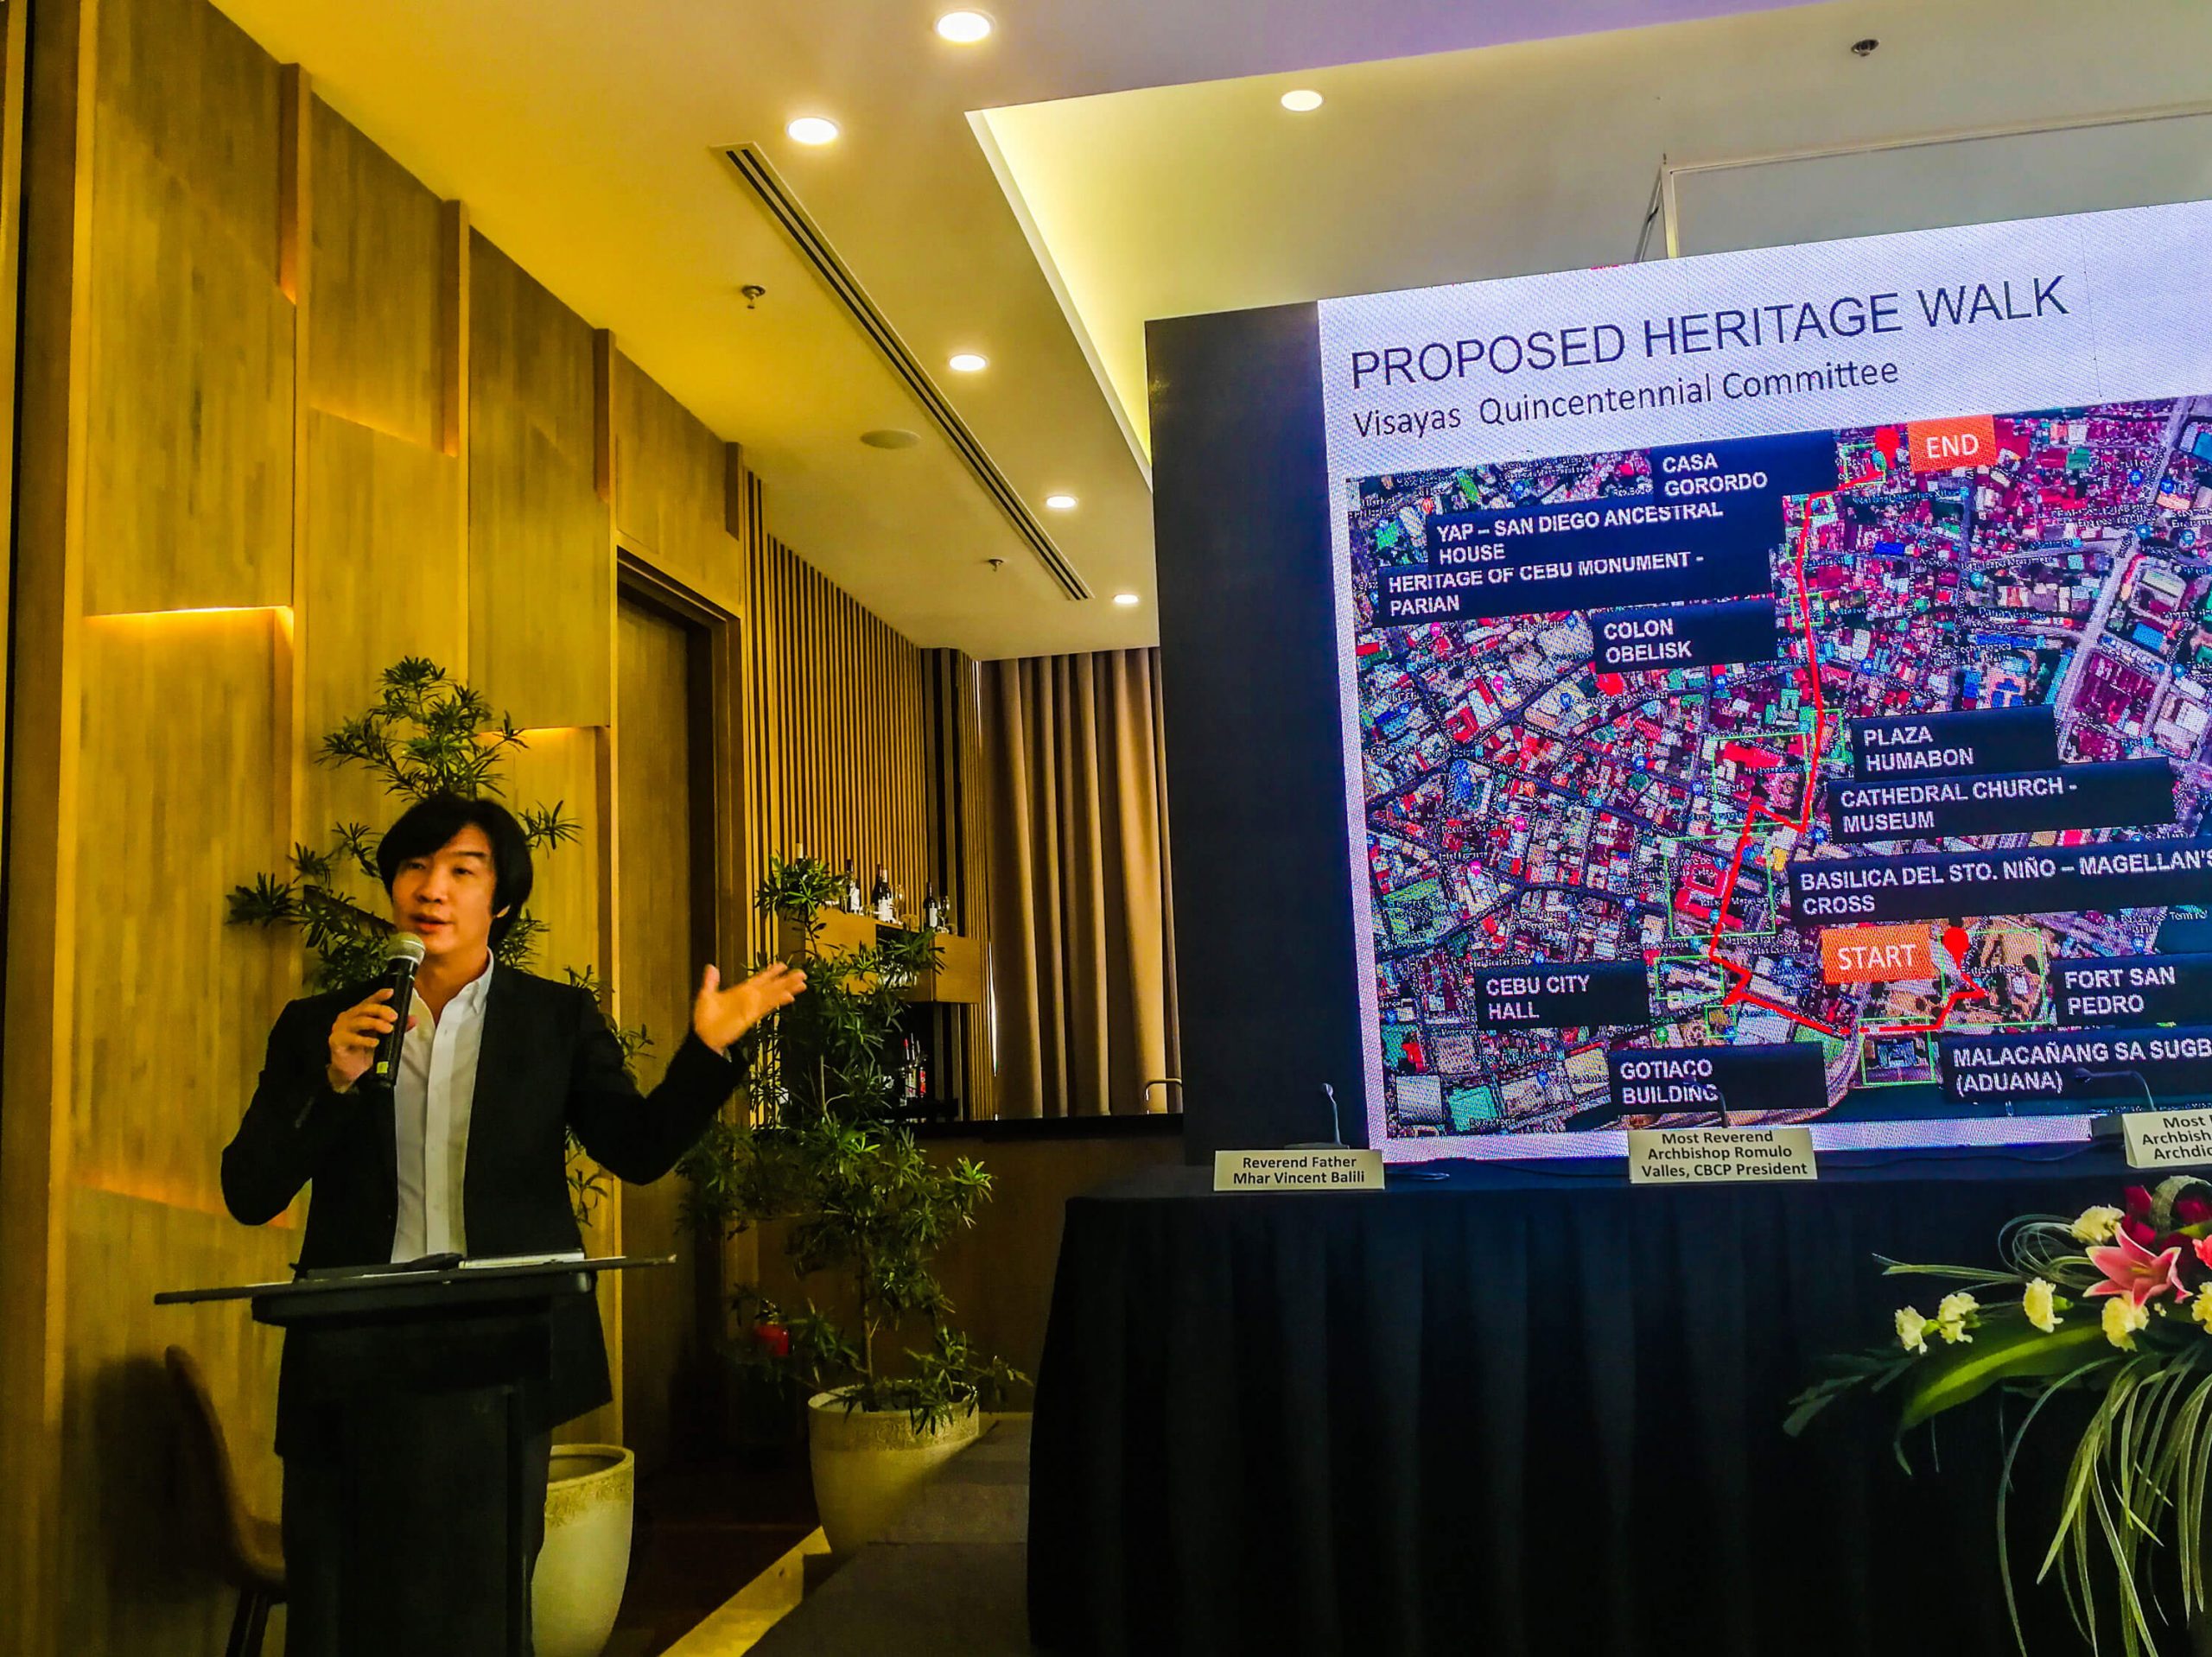 HERITAGE WALK. Designer Kenneth Cobonpue, head of the Visayas Quincentennial Committee, discusses the heritage walk the Cebu City Government and various stakeholders want to put up in time for the celebration.